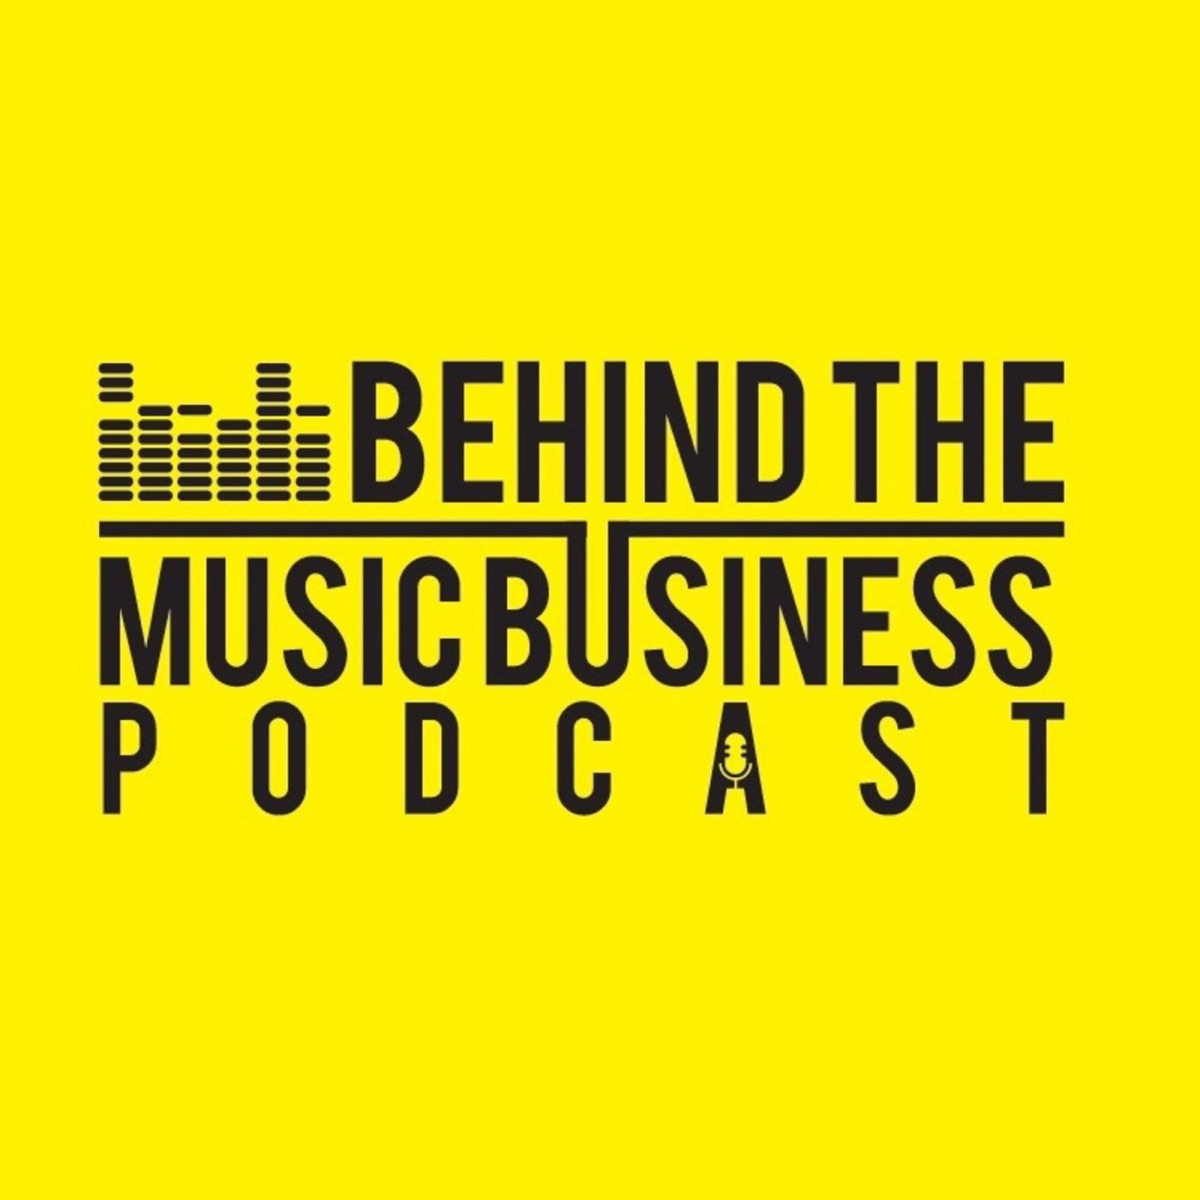 Behind the Music Business Podcast – Podcast – Podtail